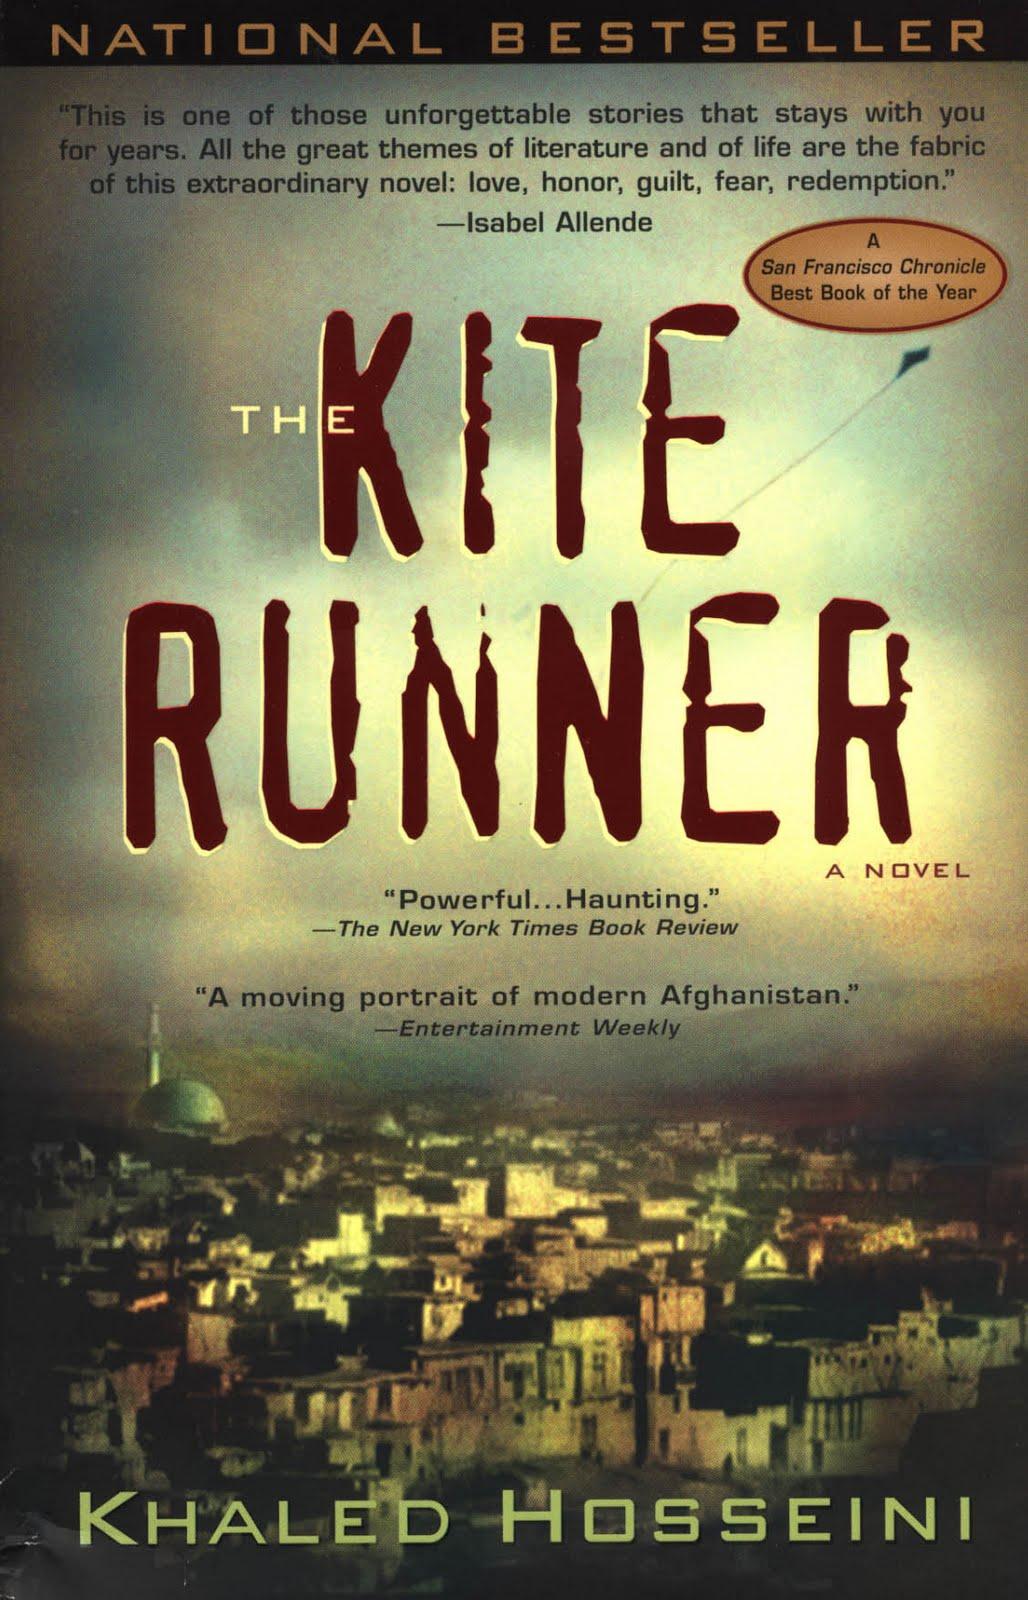 "The Kite Runner," by Khaled Hosseini, was published in 2003.